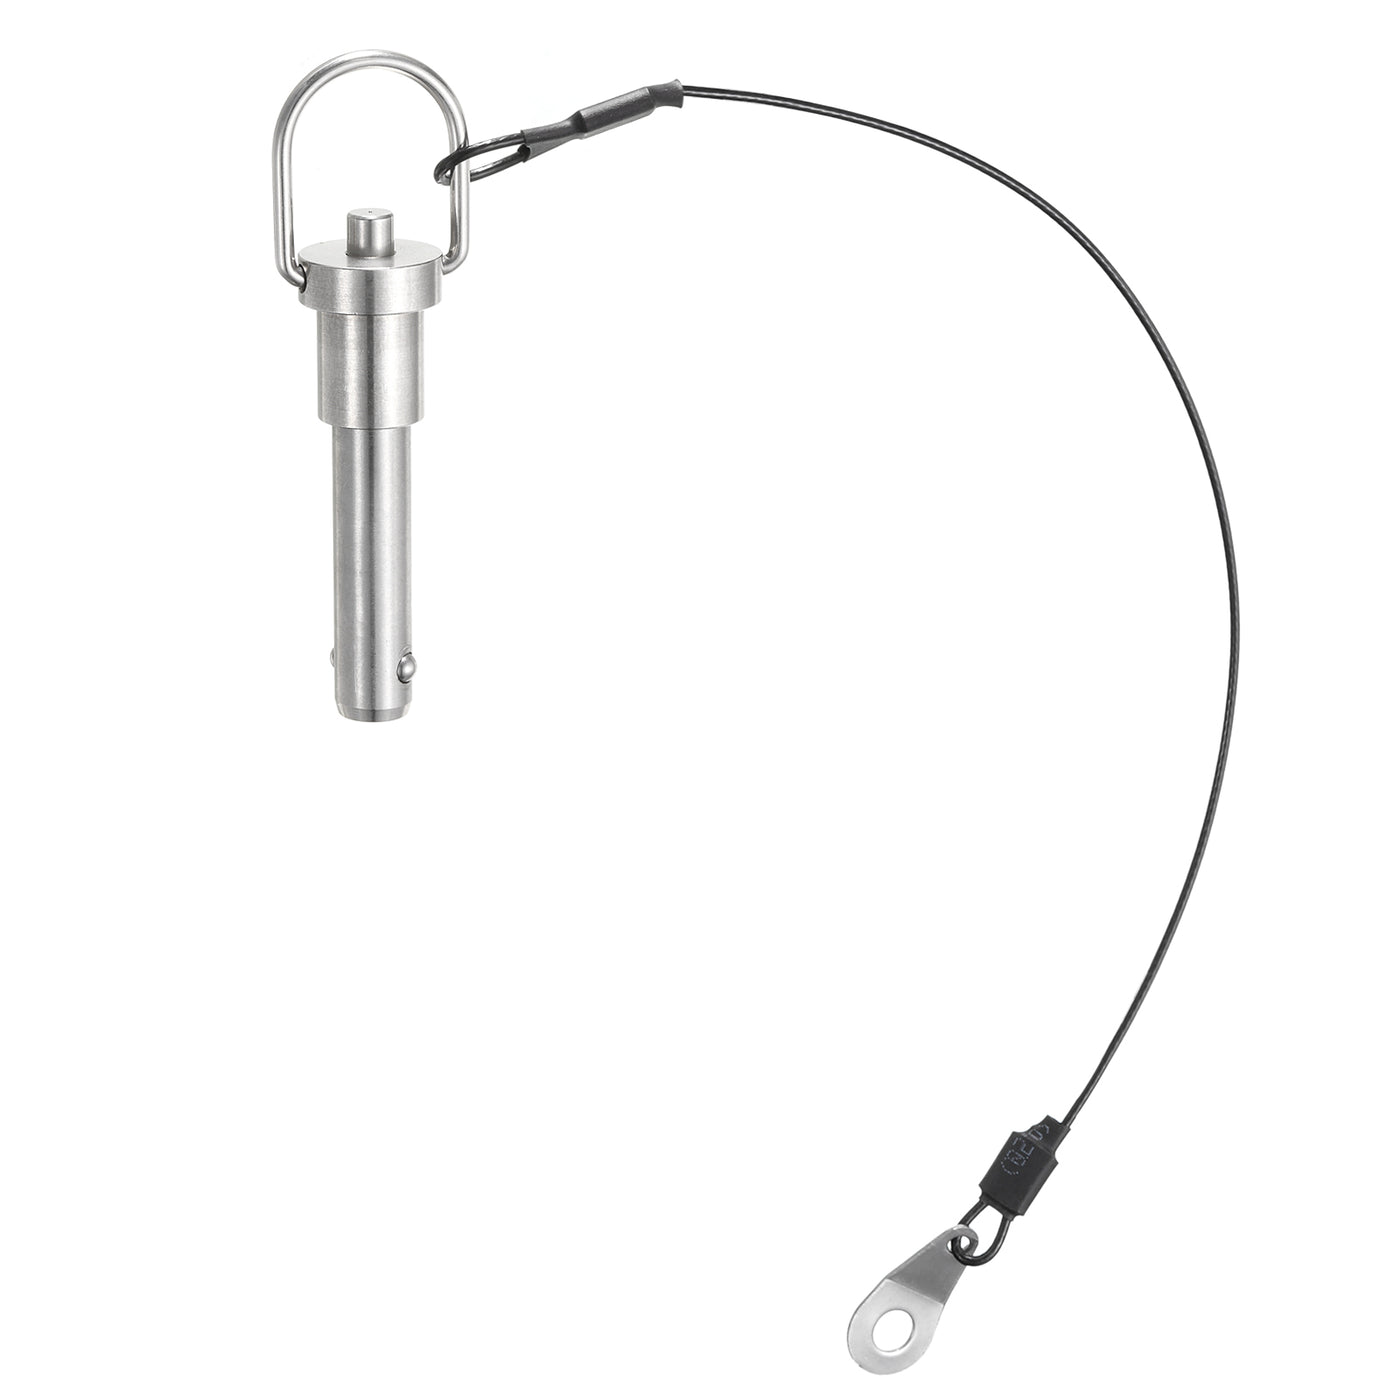 uxcell Uxcell Ball Locking Pins with Button Handle, 10mm Pin Dia. 30mm Usage Length Push-Button Quick Release Pin with Lanyard Cable, 304 Stainless Steel